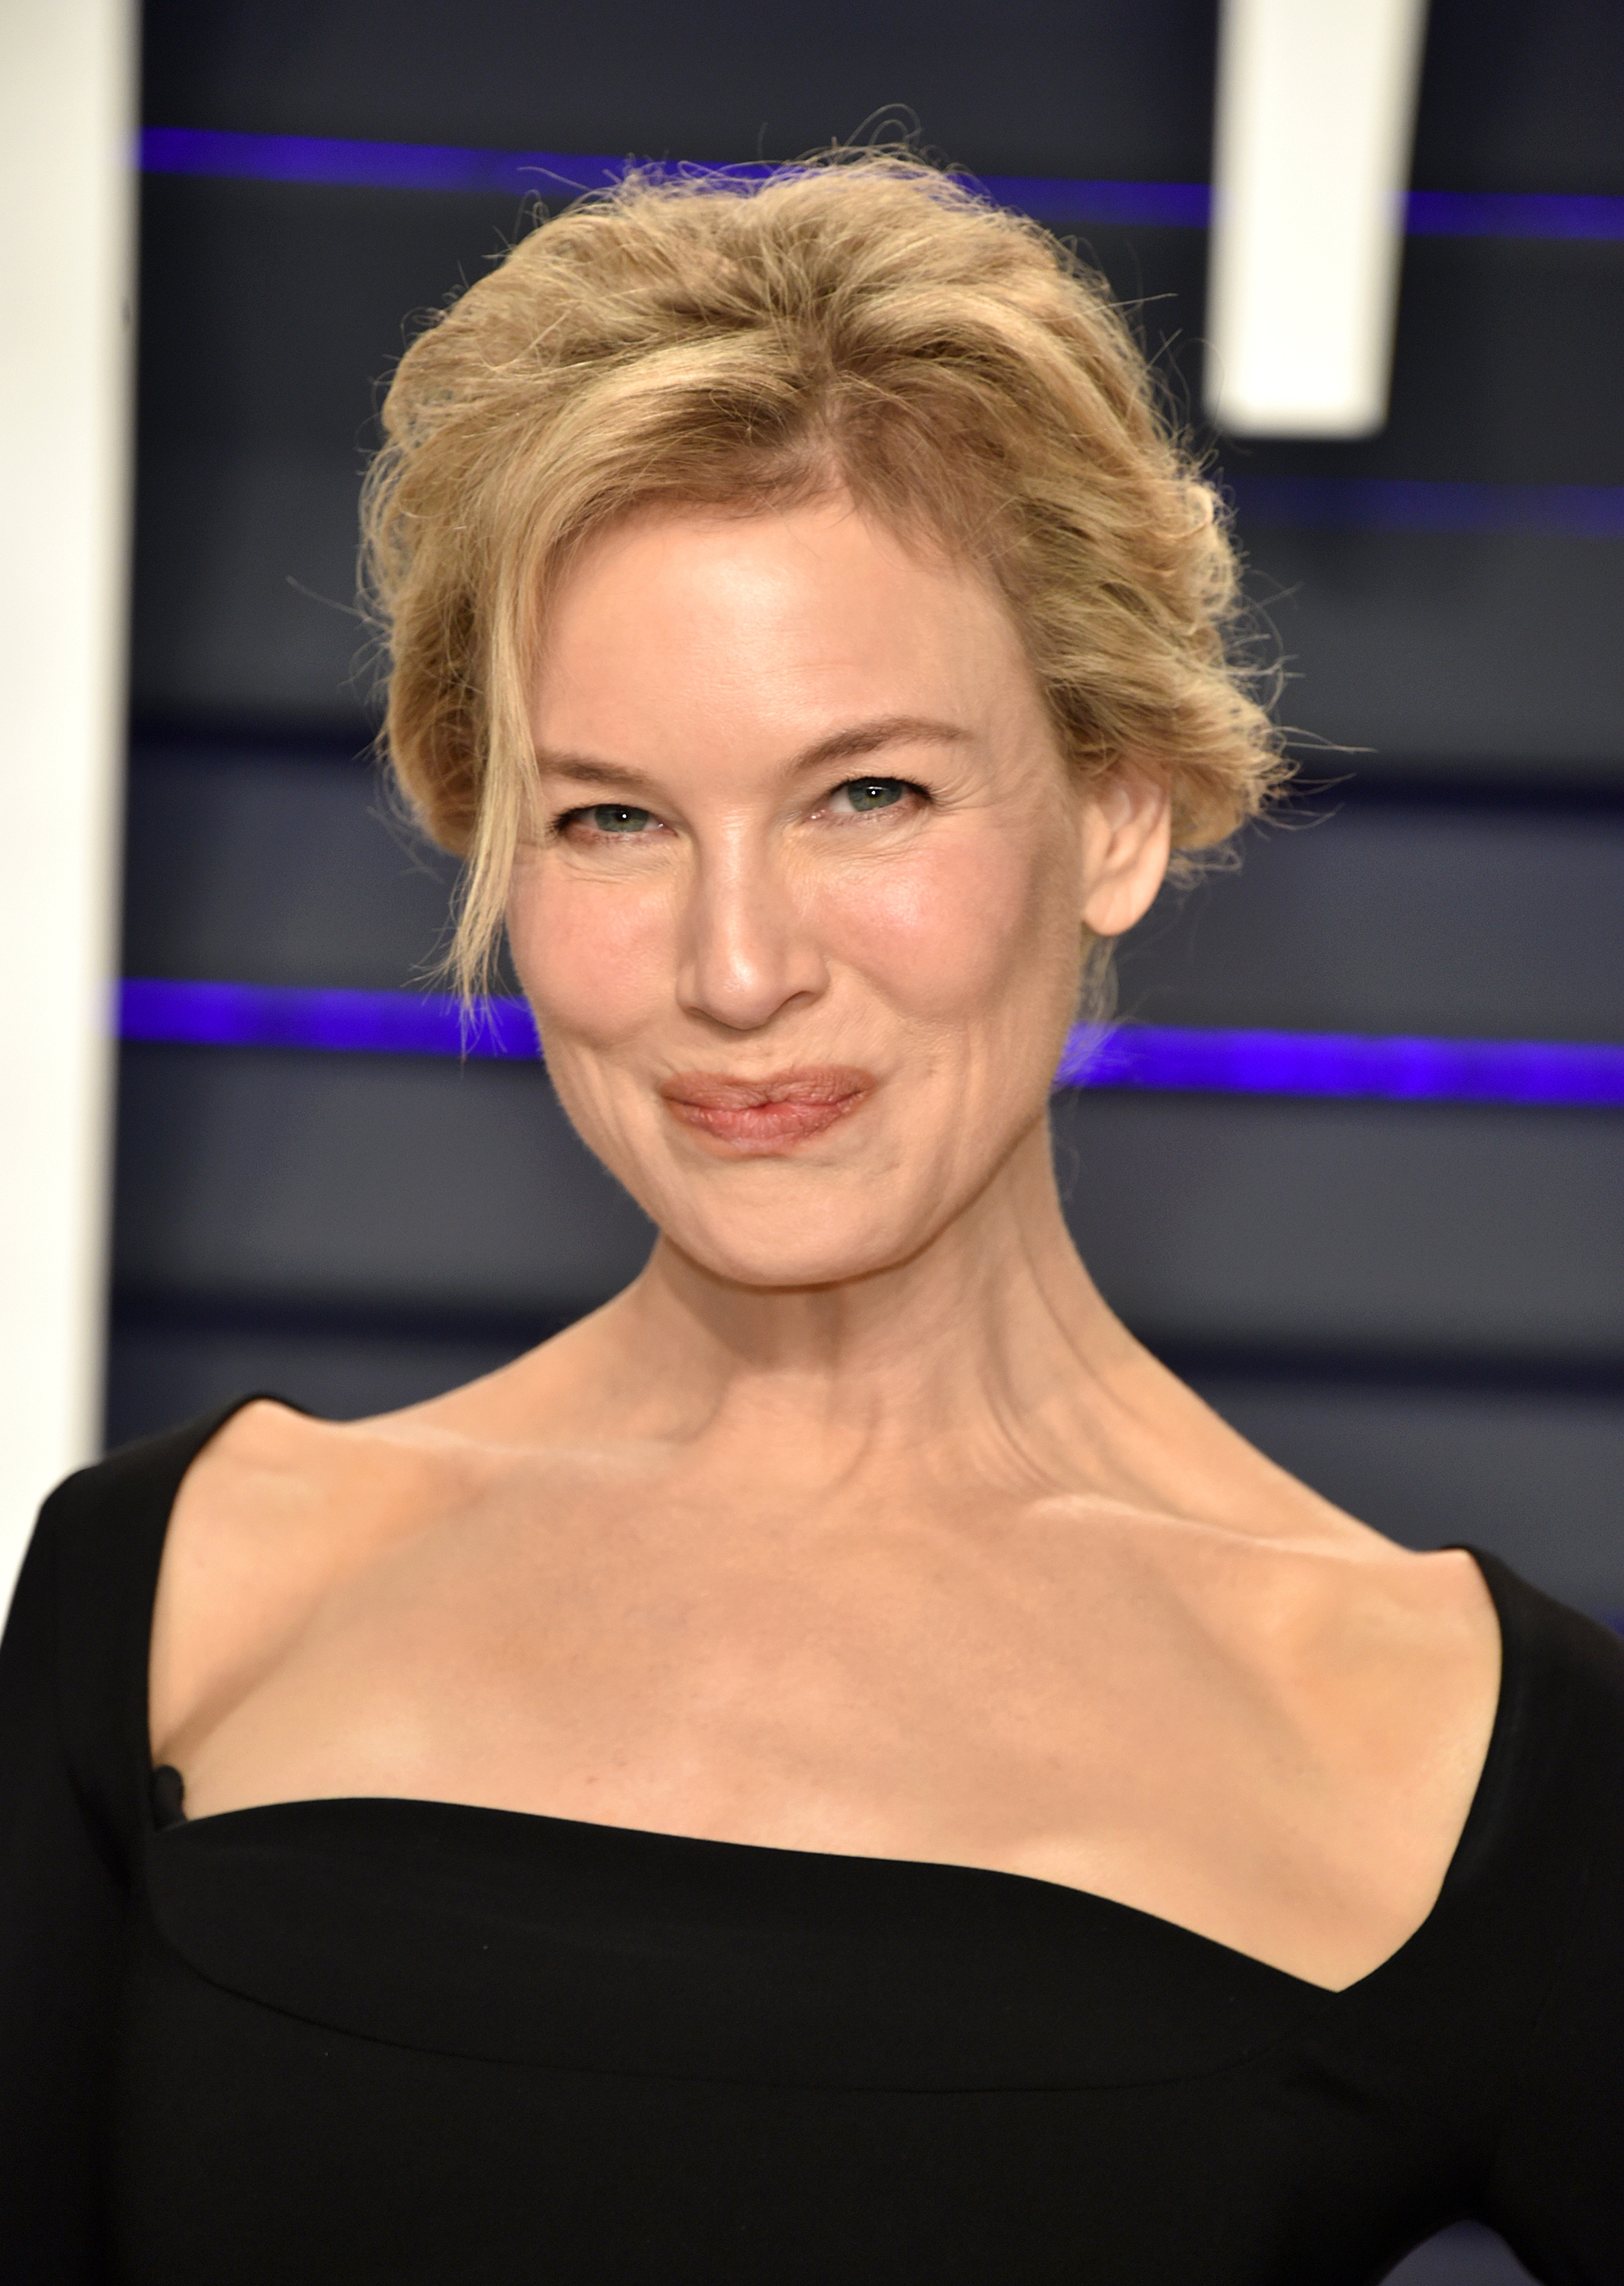 Renee Zellweger in Beverly Hills, California on February 24, 2019 | | Source: Getty Images